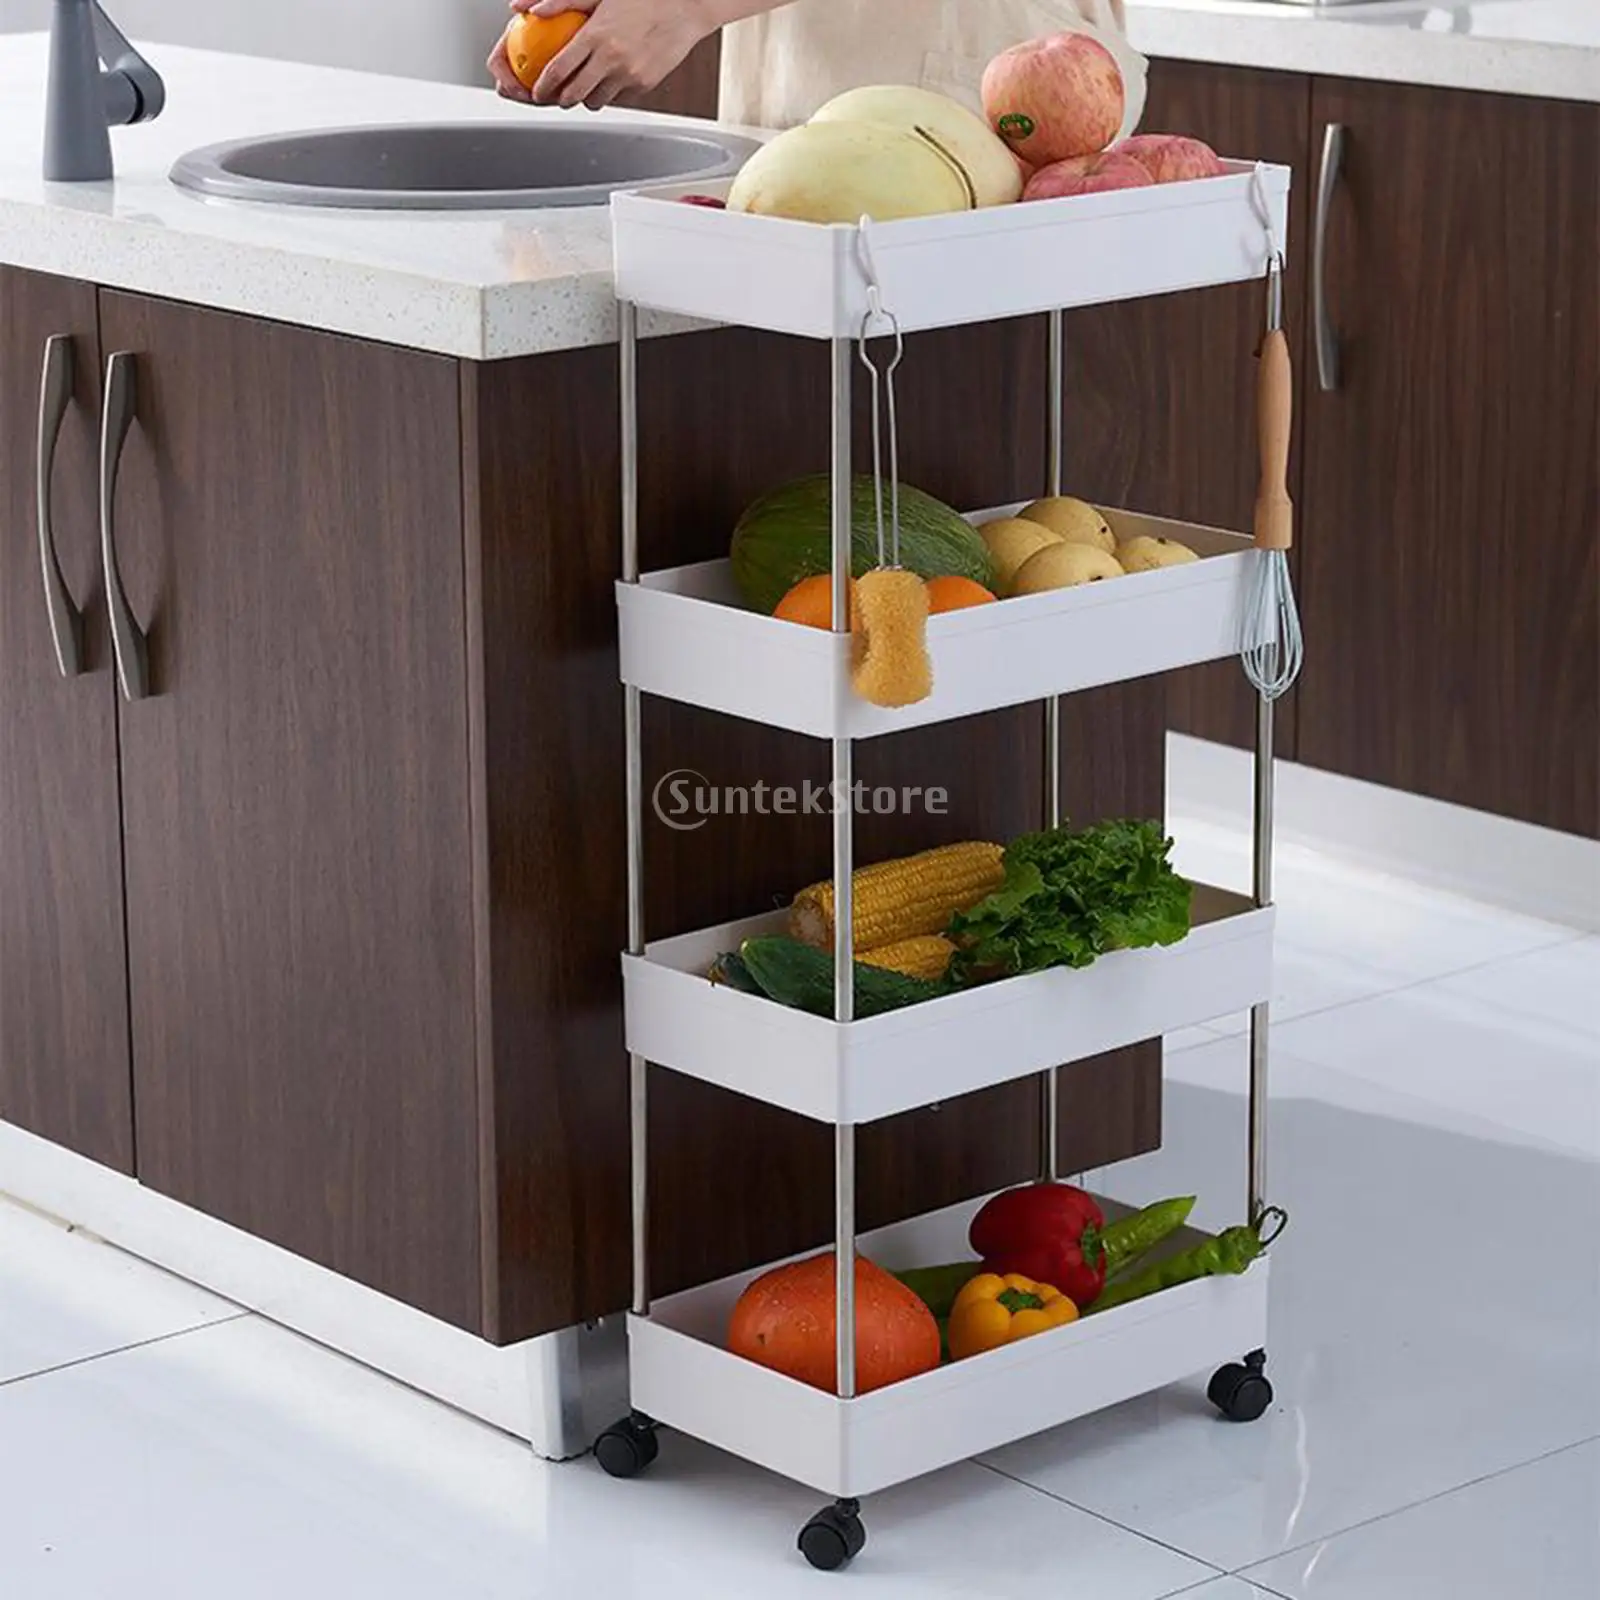 Household Storage Cart Mobile Storage Unitsw with 4 Wheels for Kitchen Bathroom Laundry